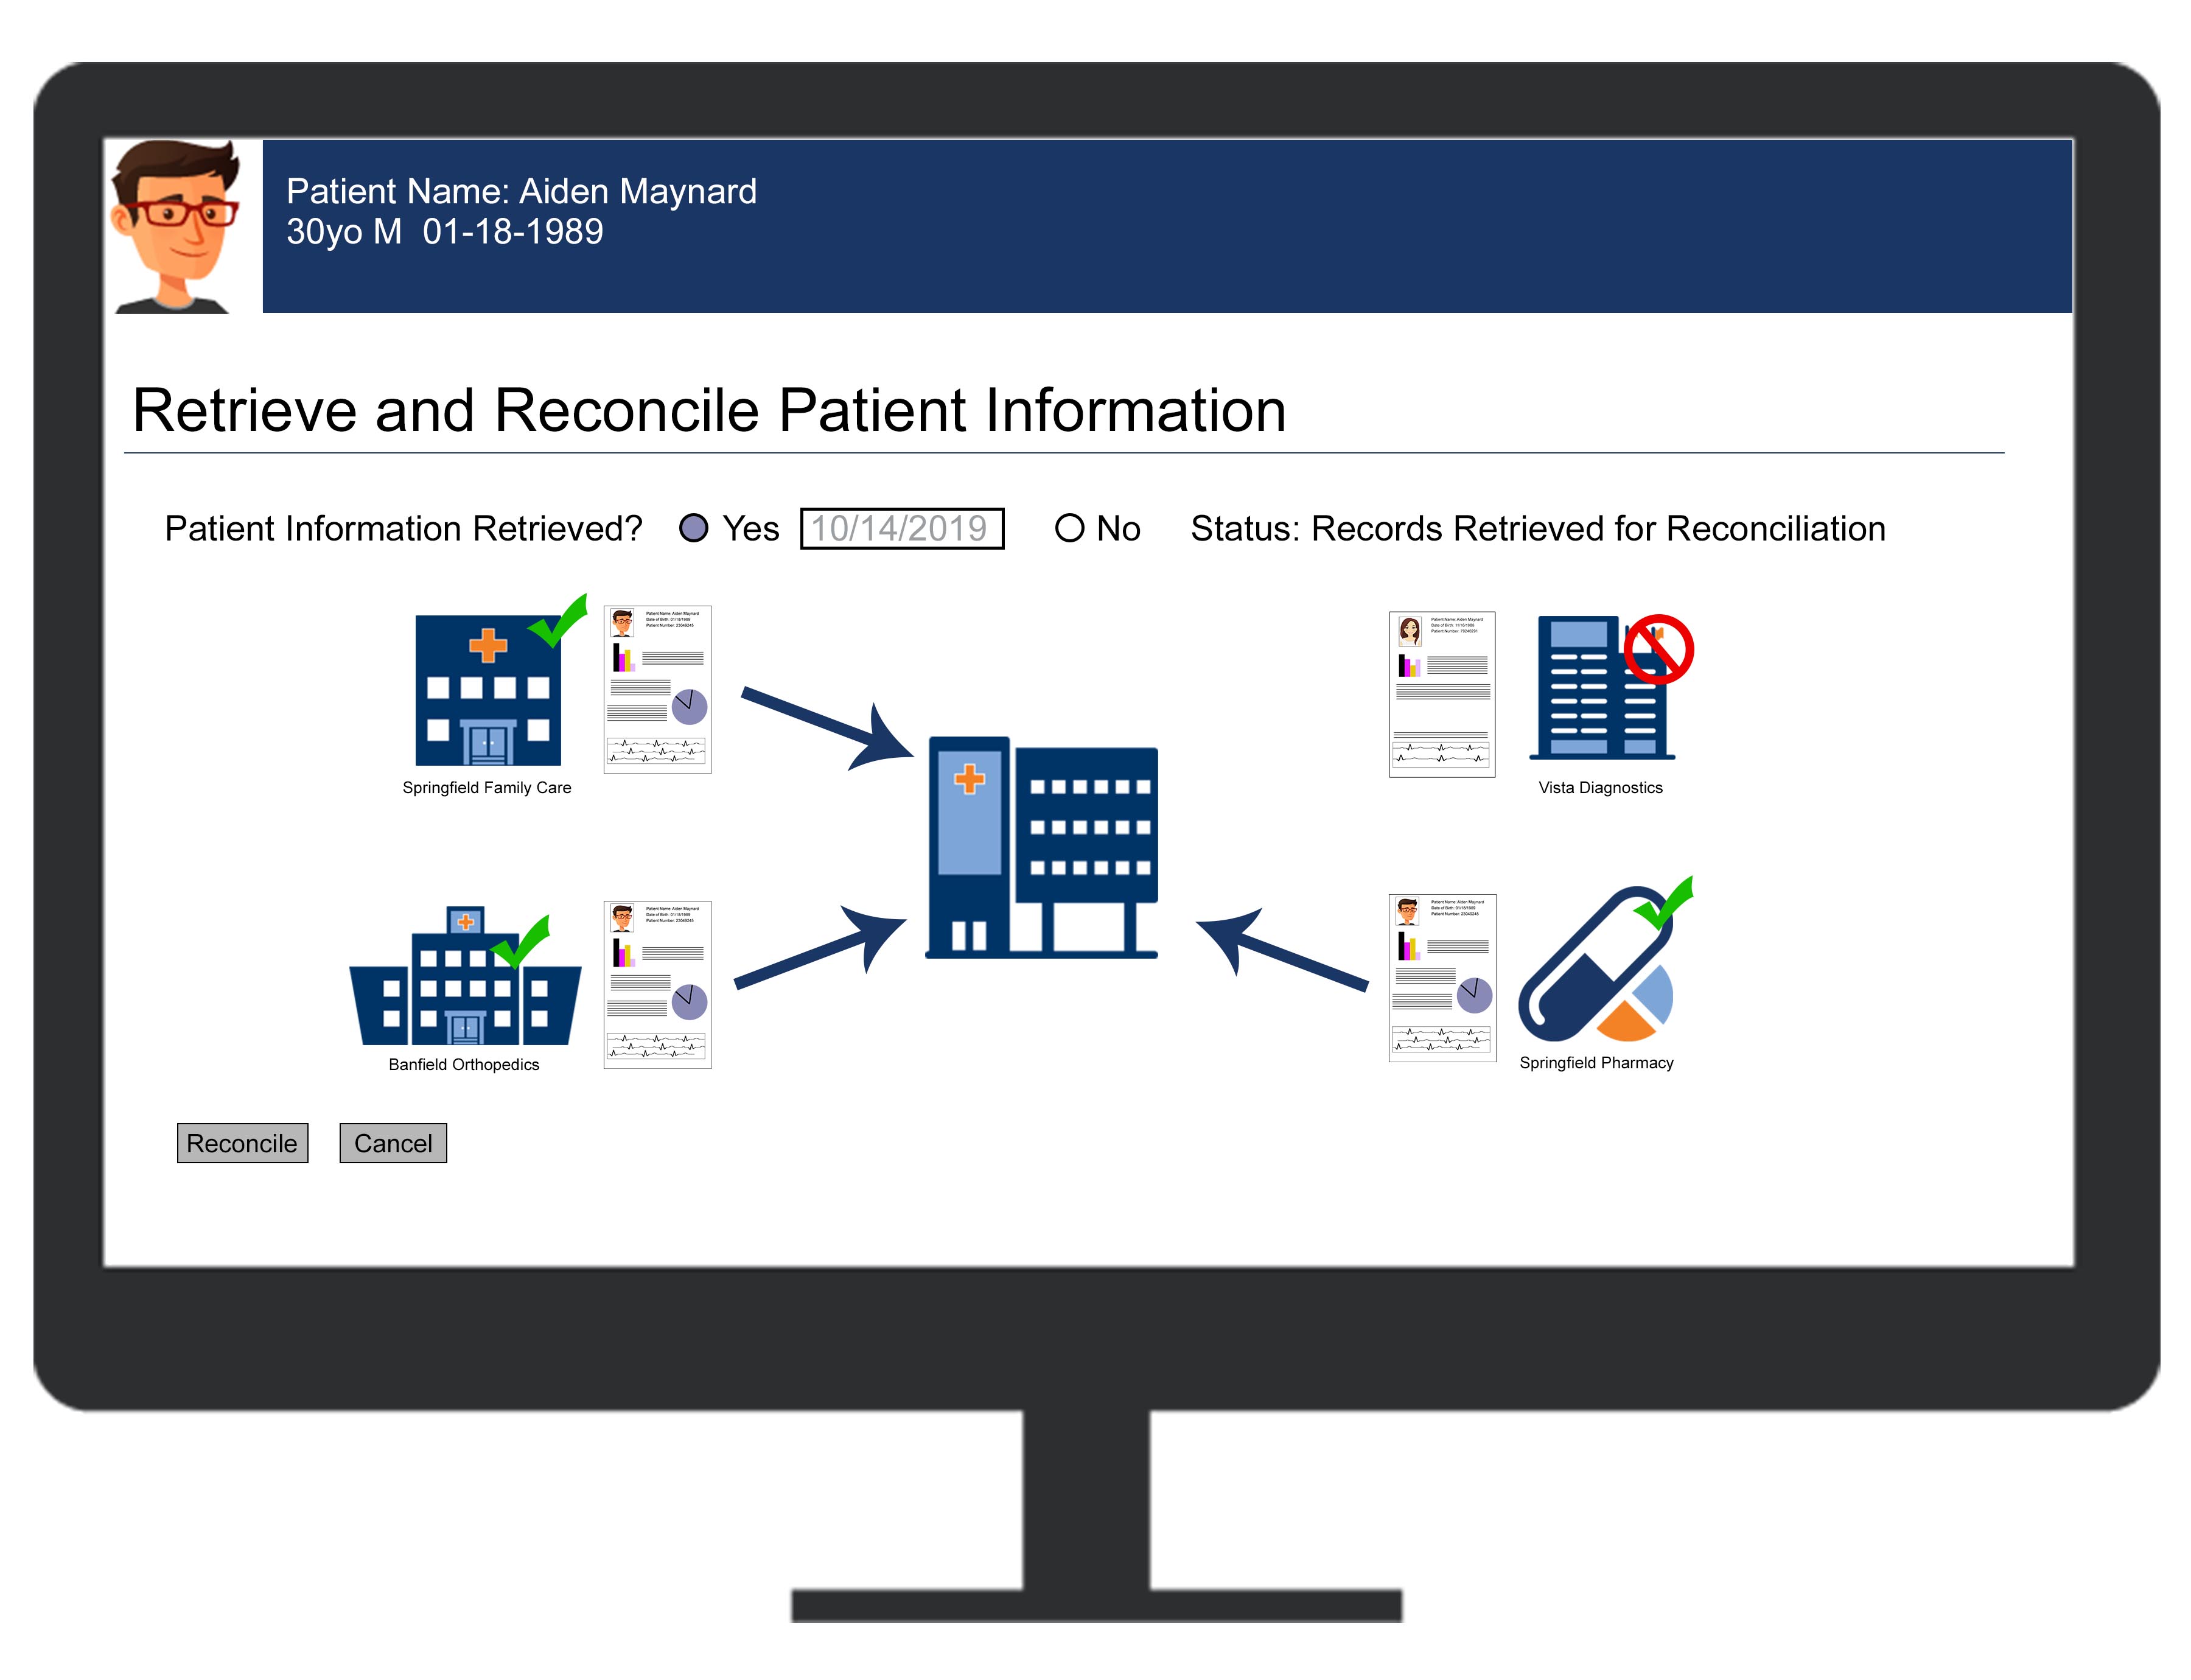 Example of a Retrieve and Reconcile screen in an EHR system